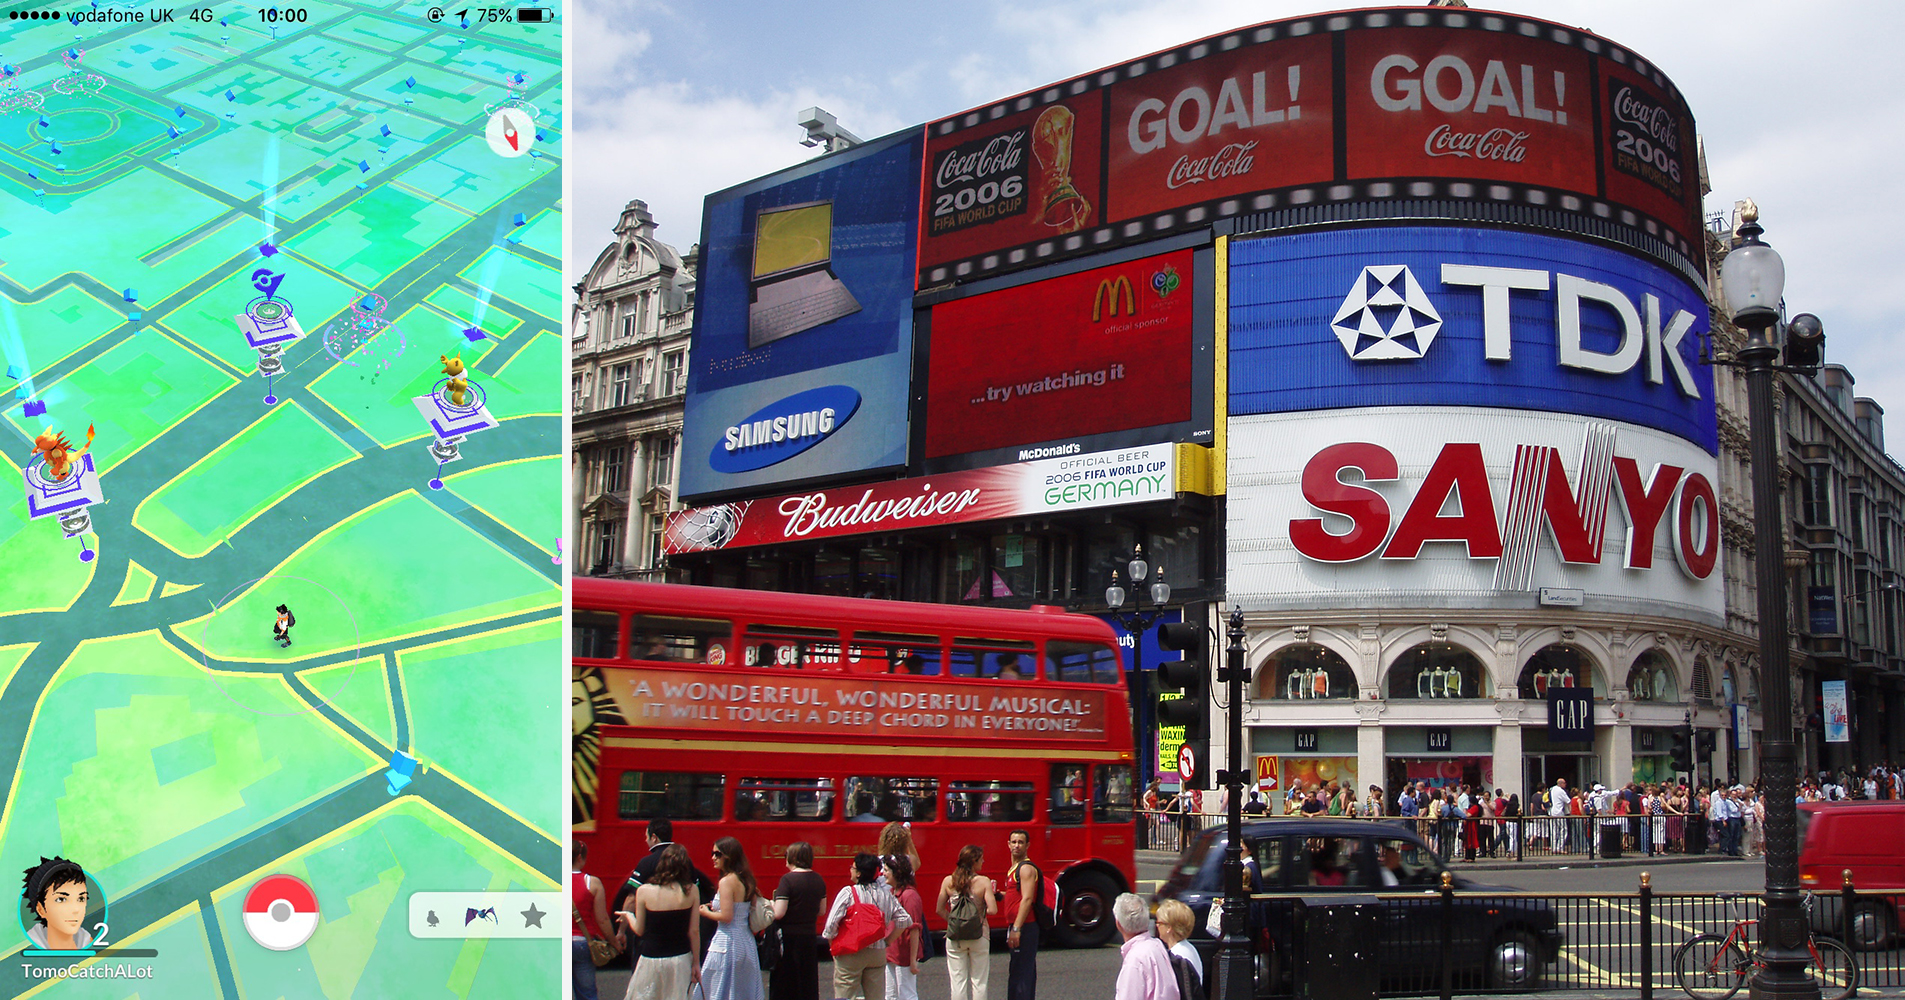 You’ll never look at London the same way again after playing Pokemon GO